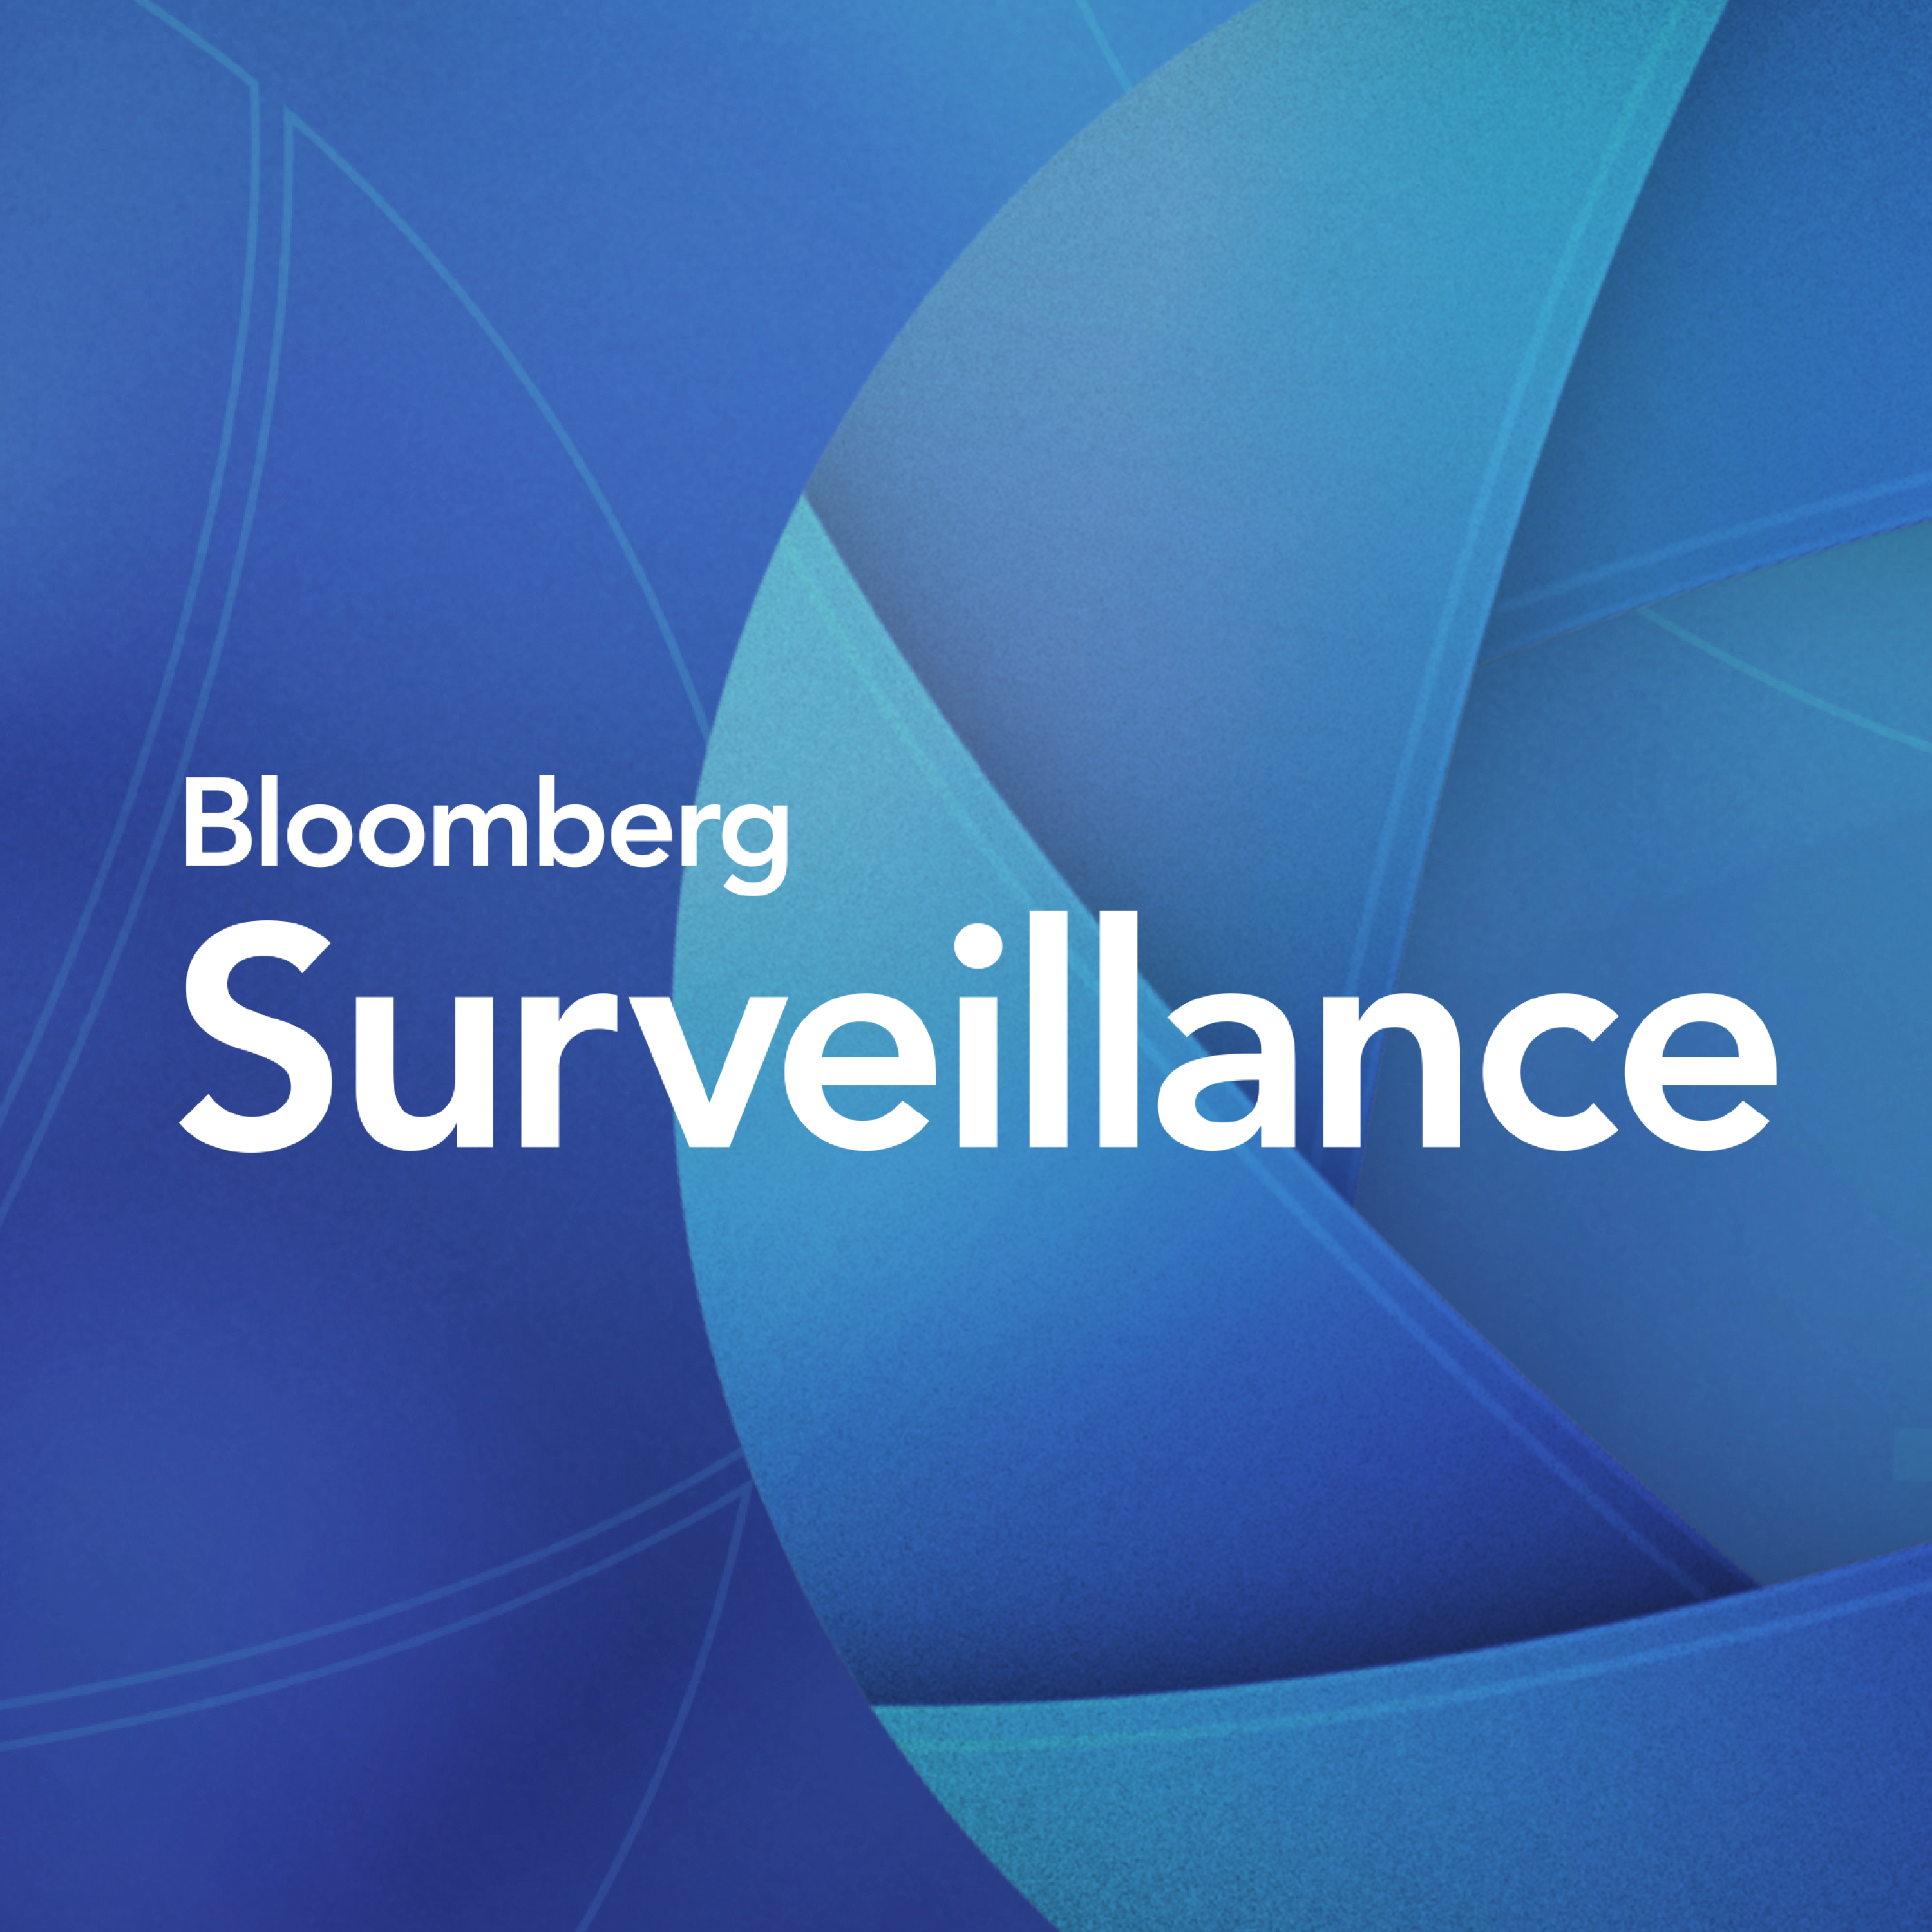 Bloomberg Surveillance: Peak Restrictions Not Reached